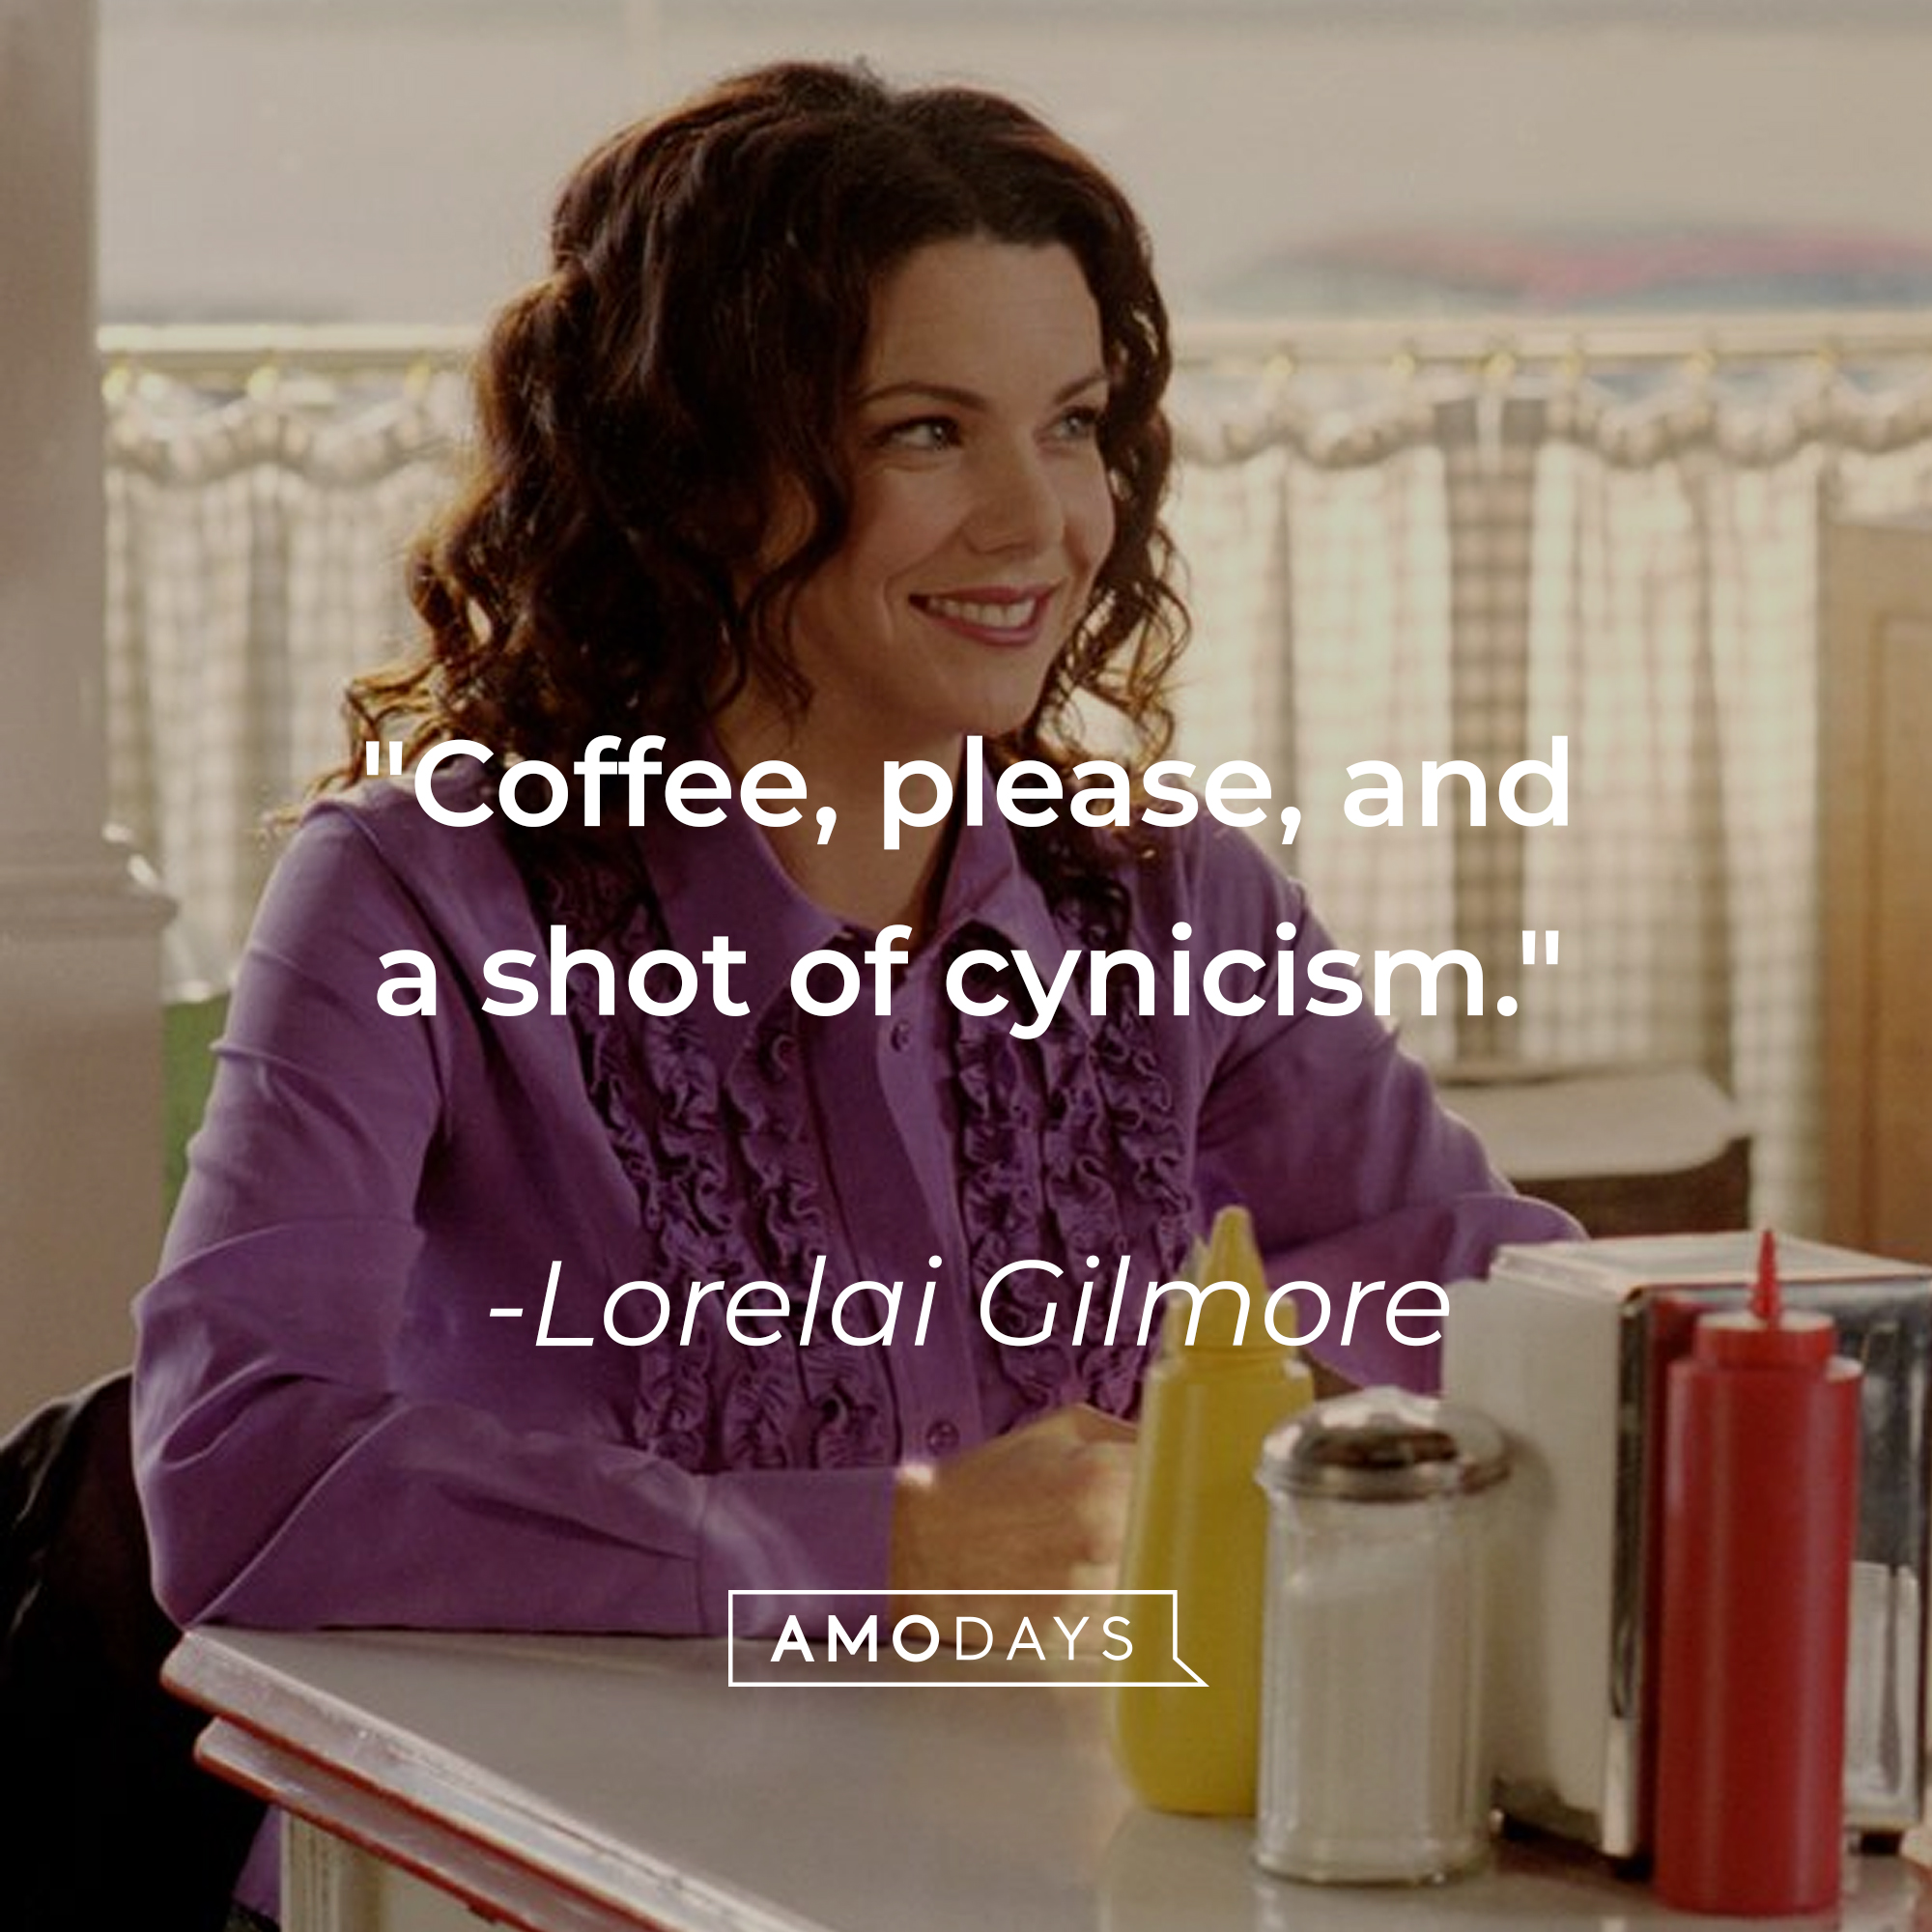 Lorelai Gilmore's quote: "Coffee, please, and a shot of cynicism." | Source: Facebook/GilmoreGirls